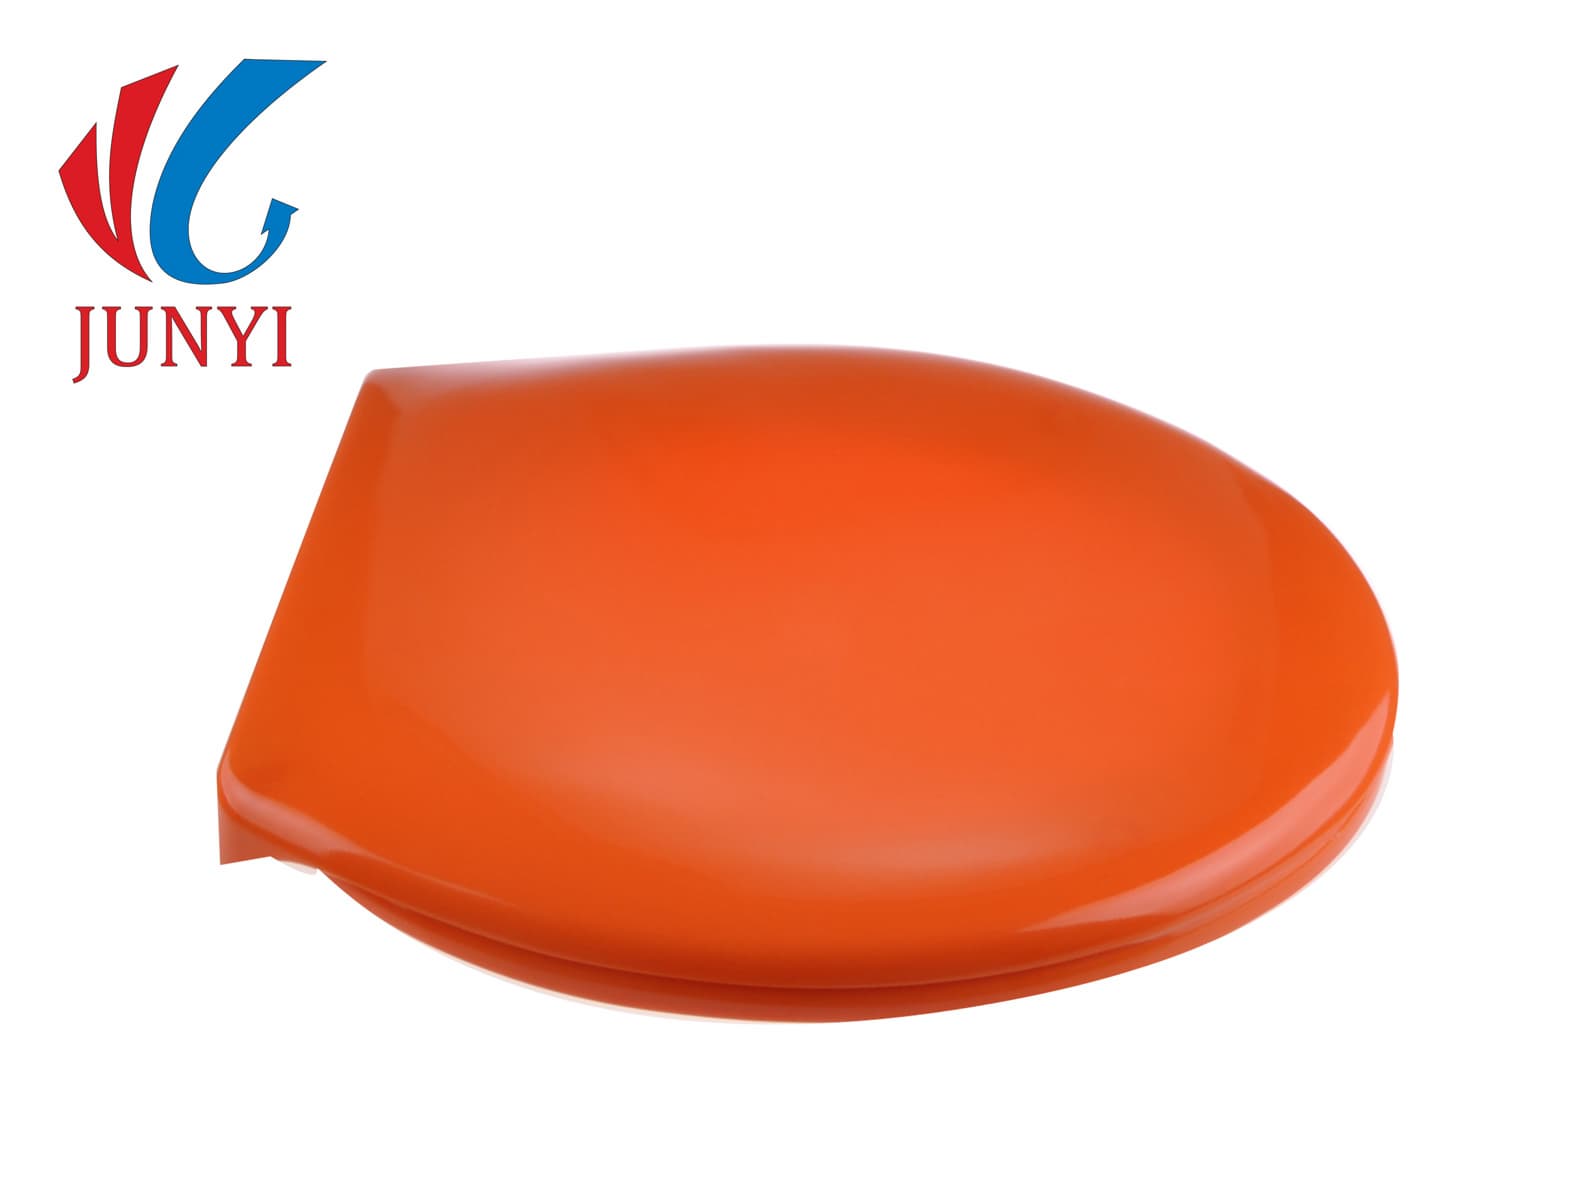 JunYi Toilet Seat Cover,Round Front, Soft Close and Easy Clean, JY/6910